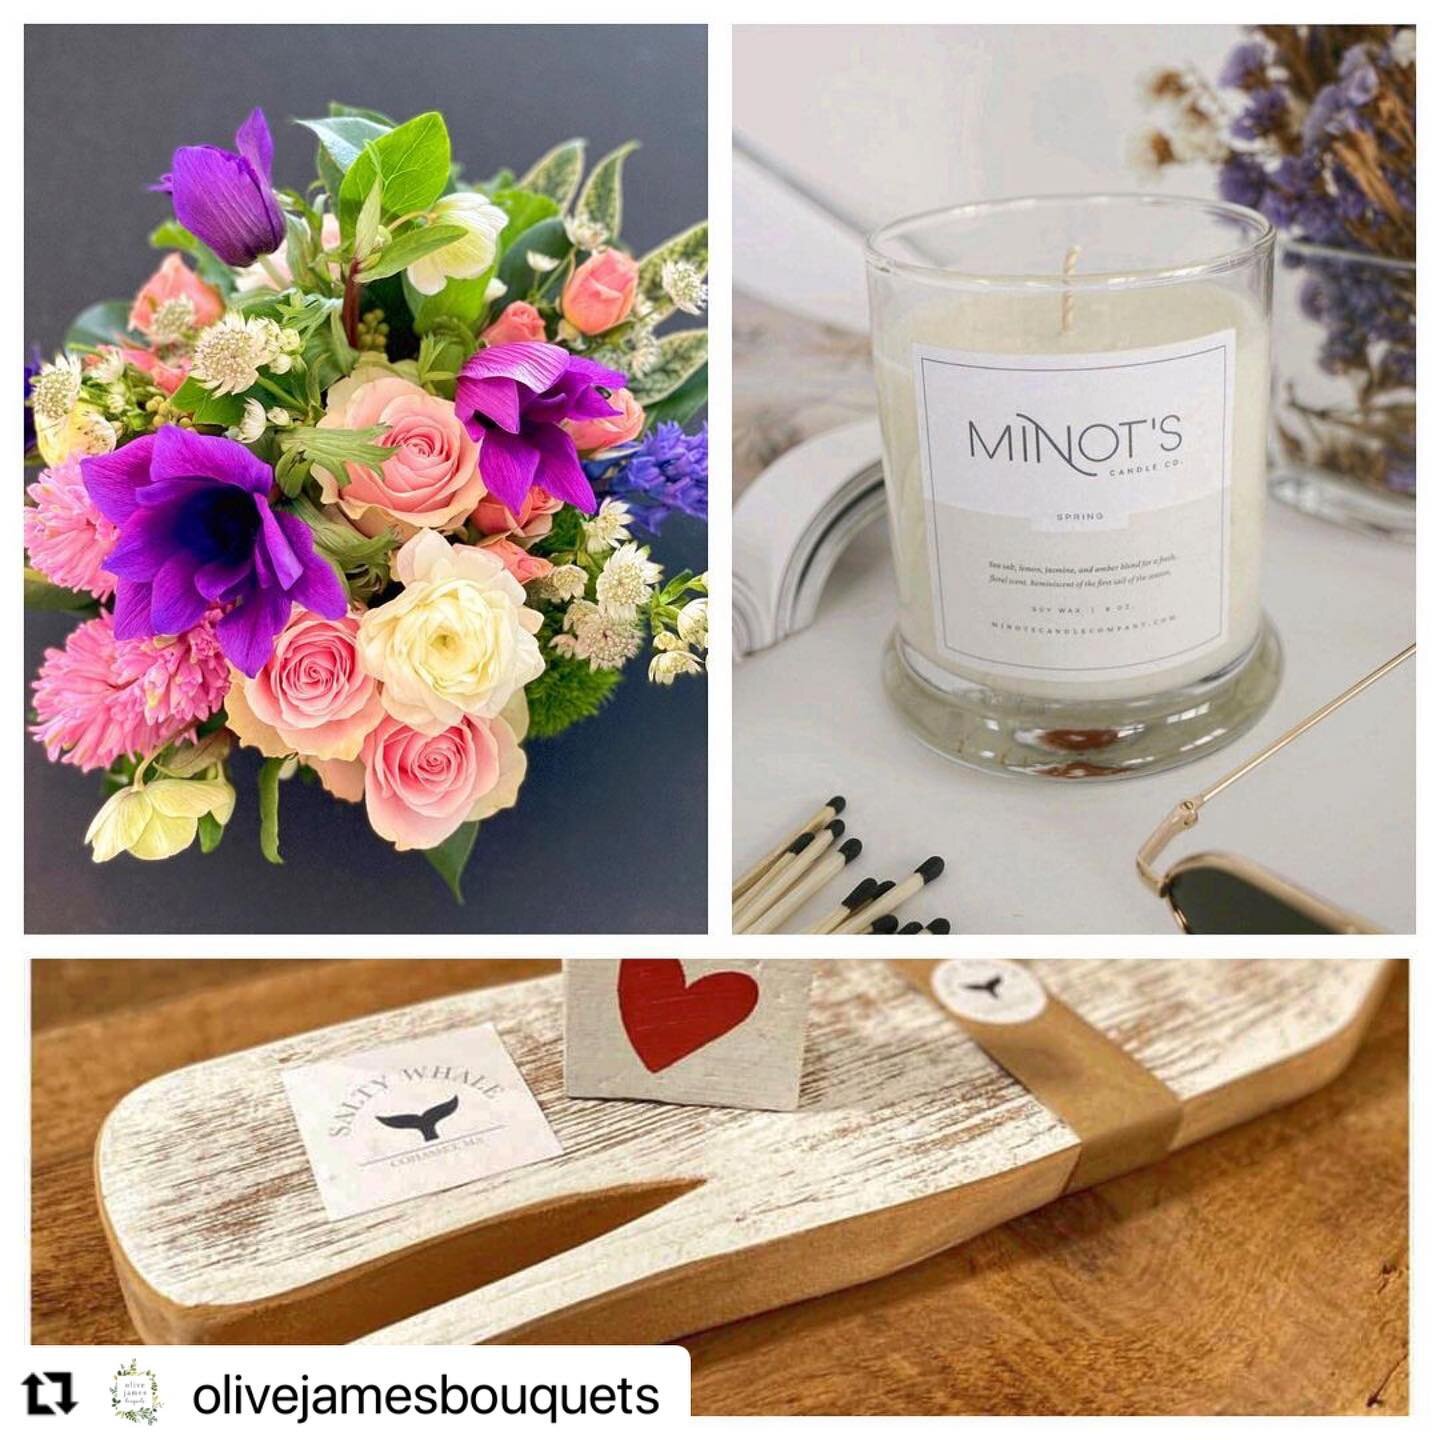 #Repost @olivejamesbouquets with @make_repost
・・・
Cohasset Earth Day Giveaway!
Celebrate with us during #ecohassetapril and get involved by following @cohassetearthday 🌎 
As small business owners we share much in common, especially a commitment to b